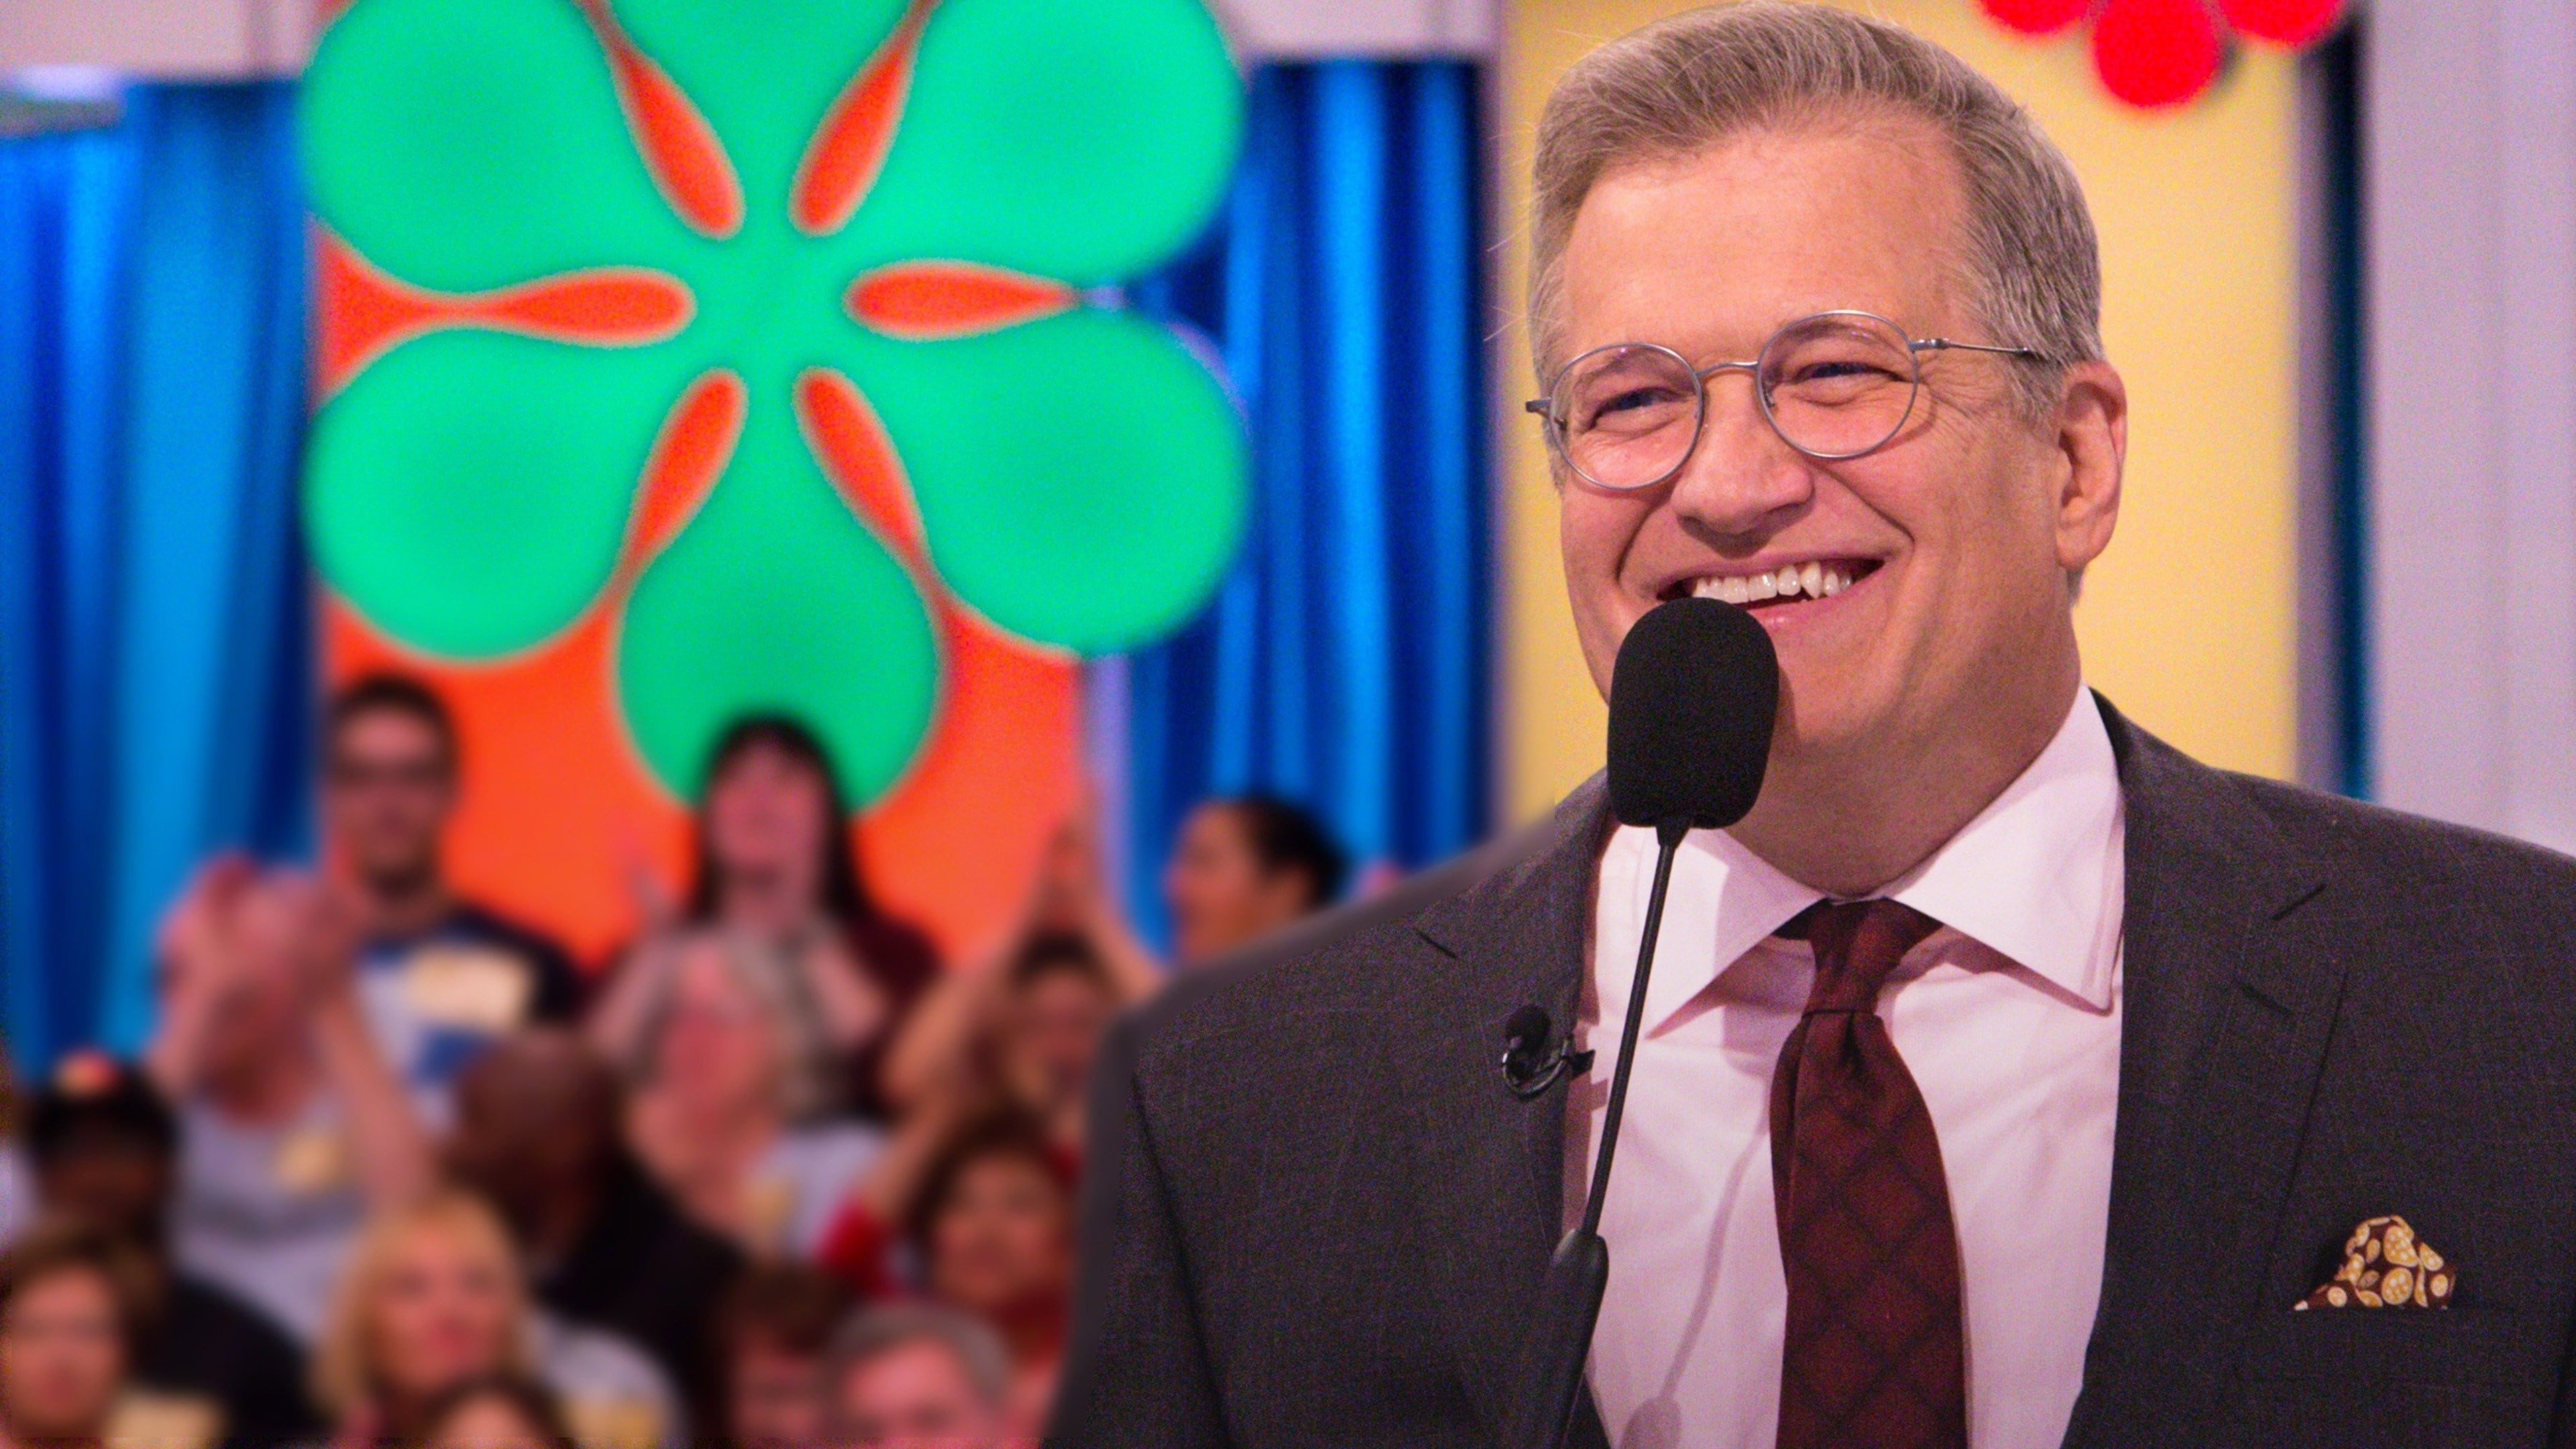 The Price Is Right - Season 6 Episode 201 : The Price Is Right Season 6 Episode 201